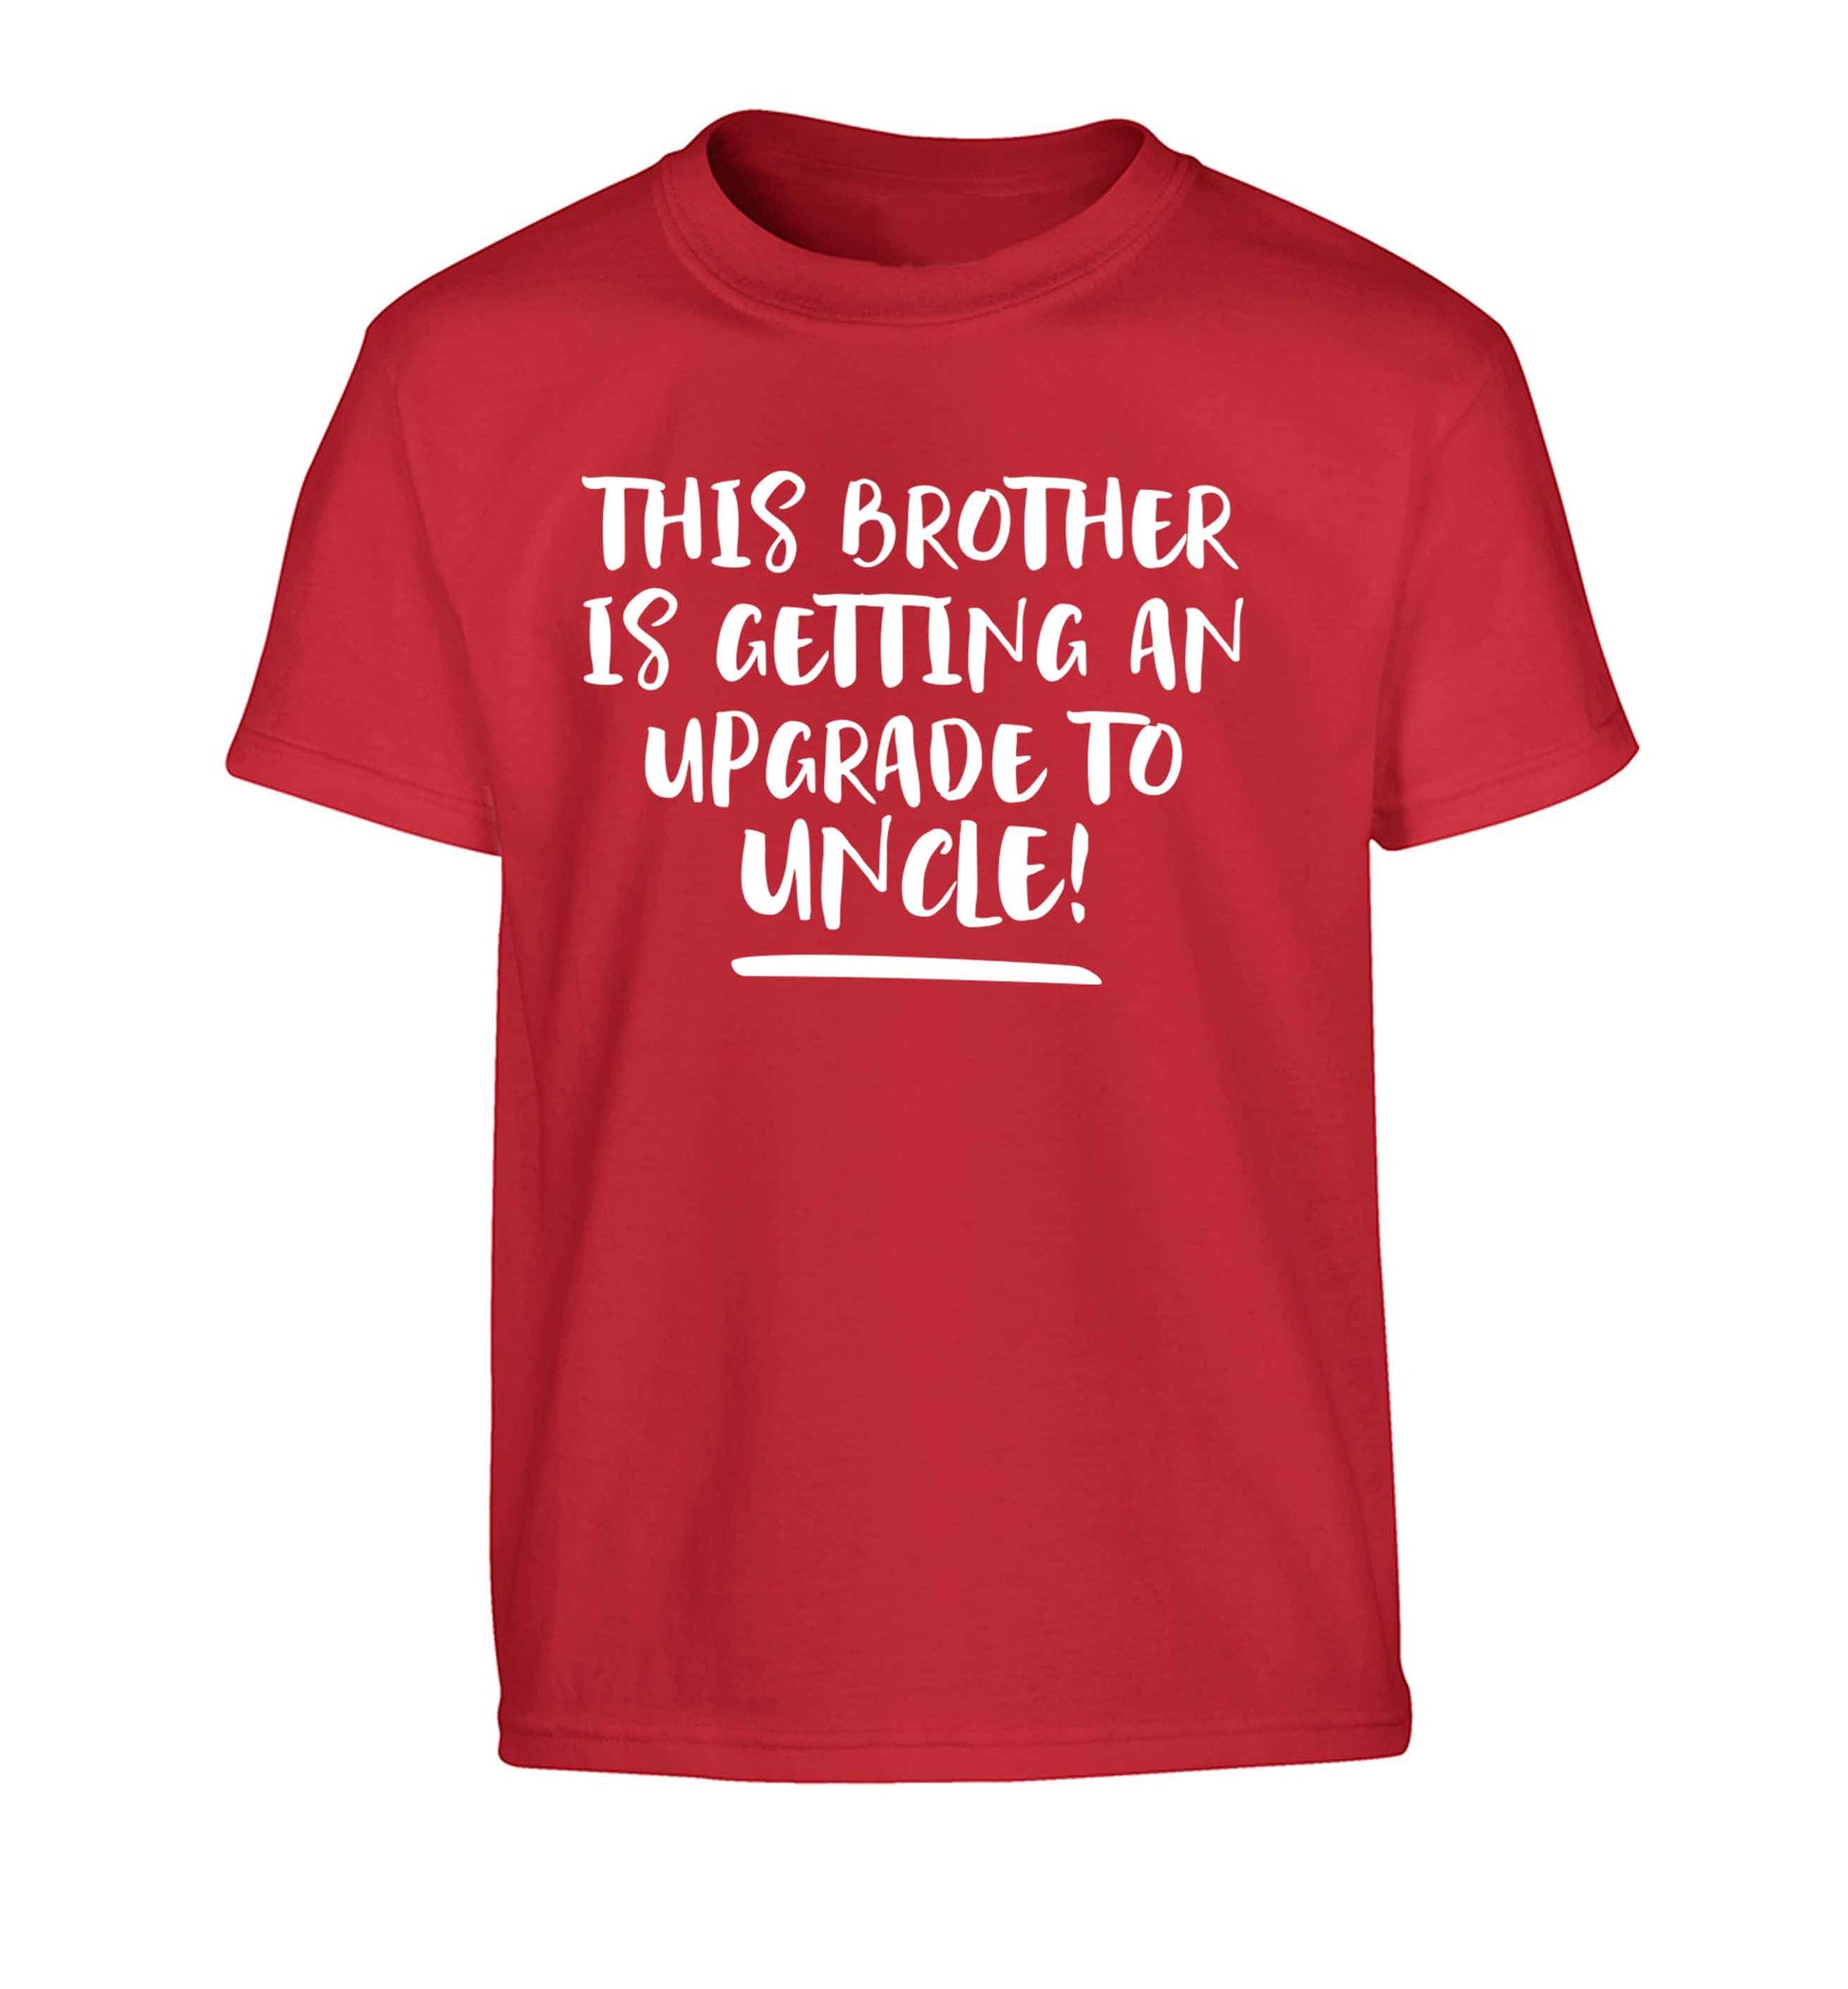 This brother is getting an upgrade to uncle! Children's red Tshirt 12-13 Years